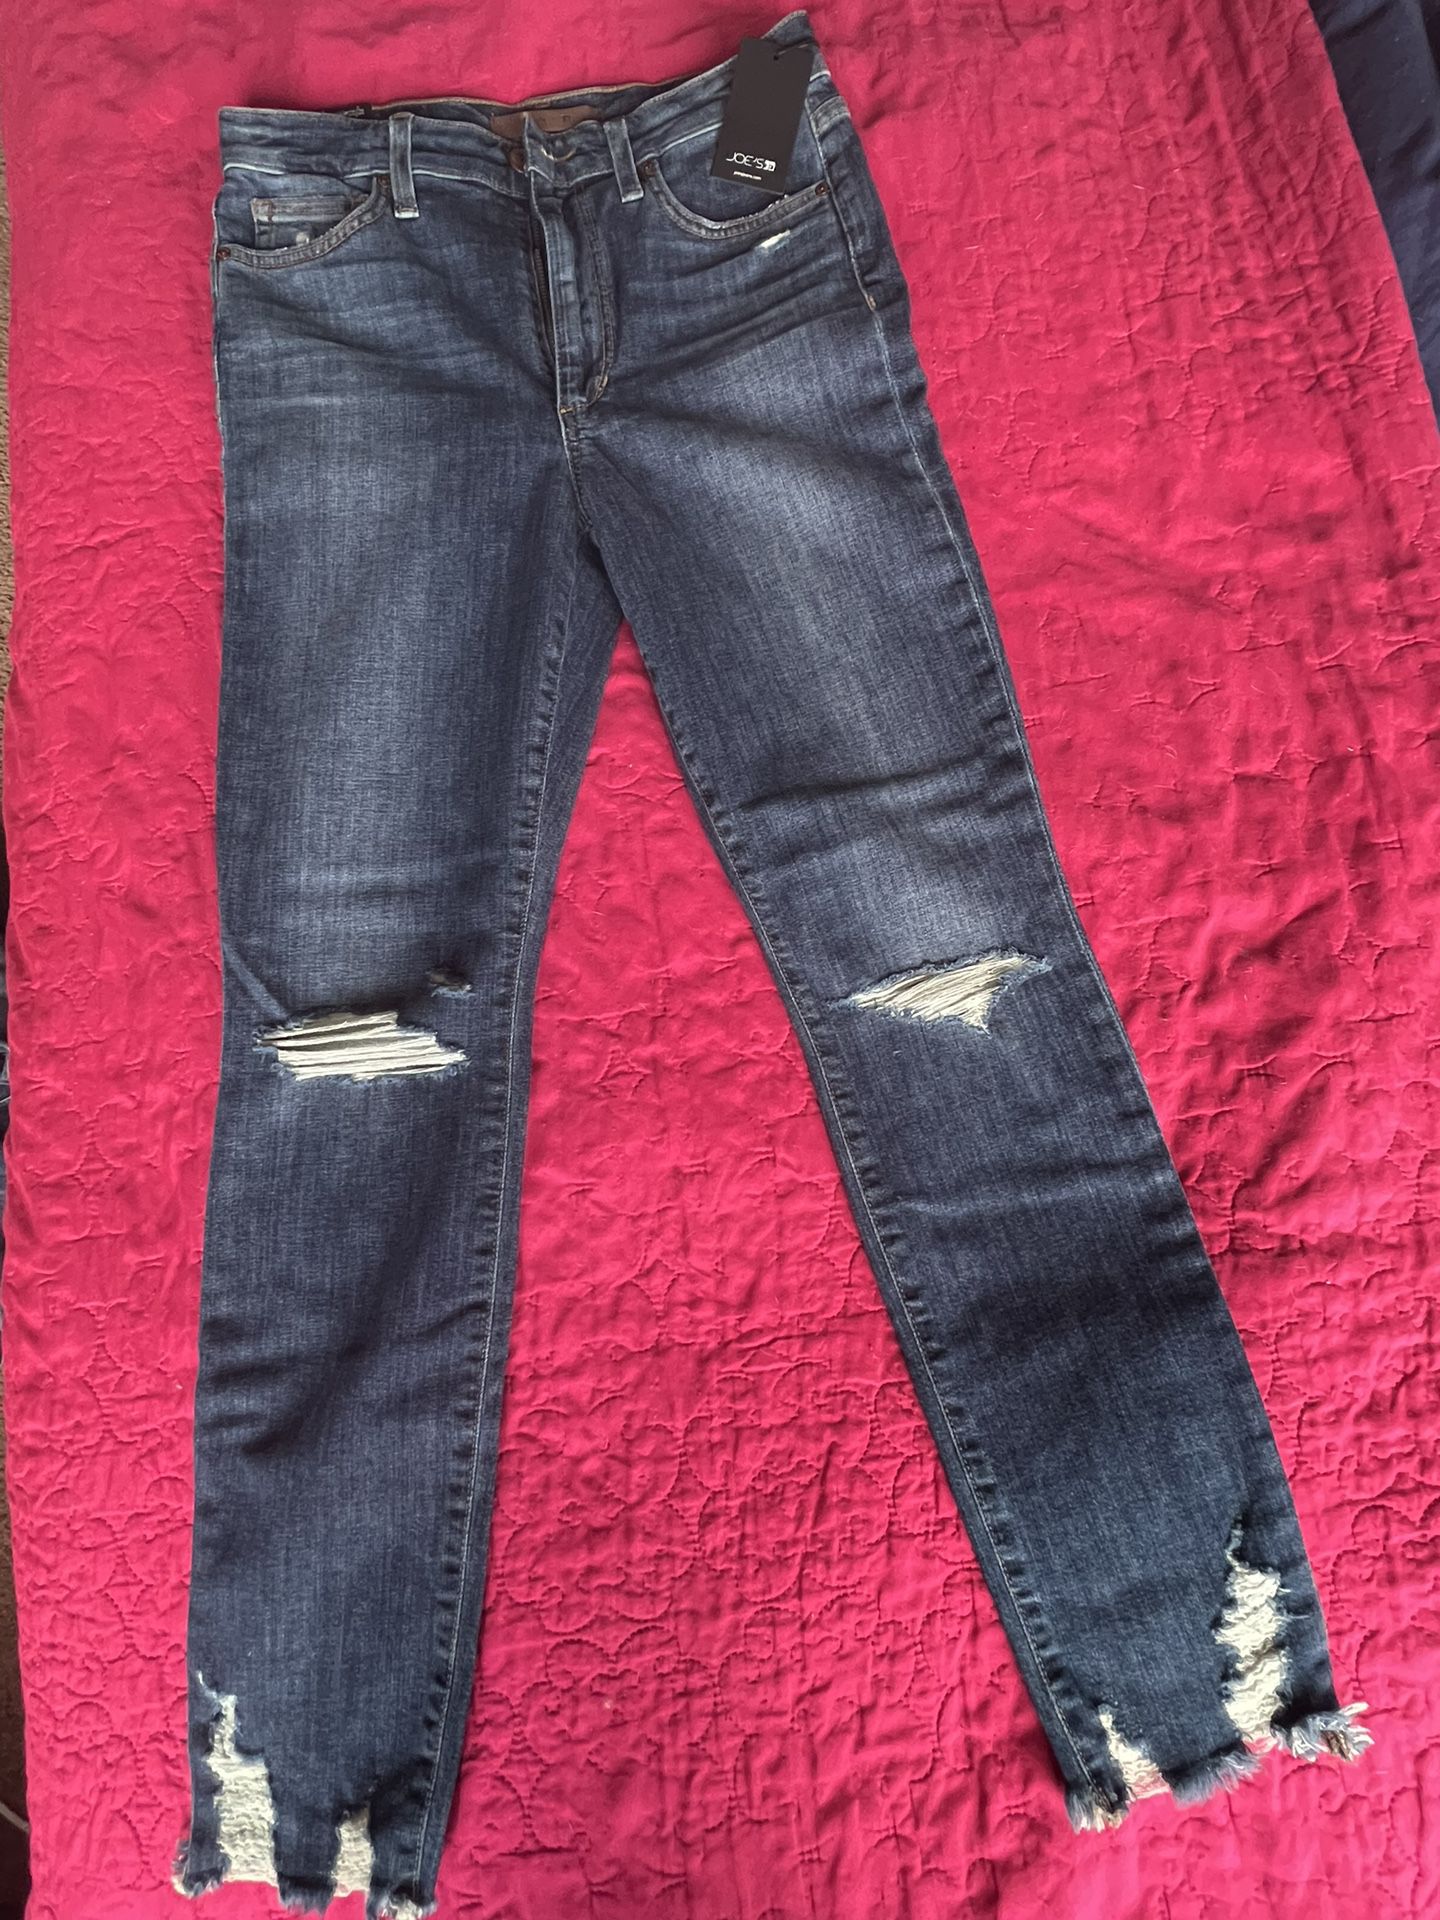 Joes Jeans Size 27